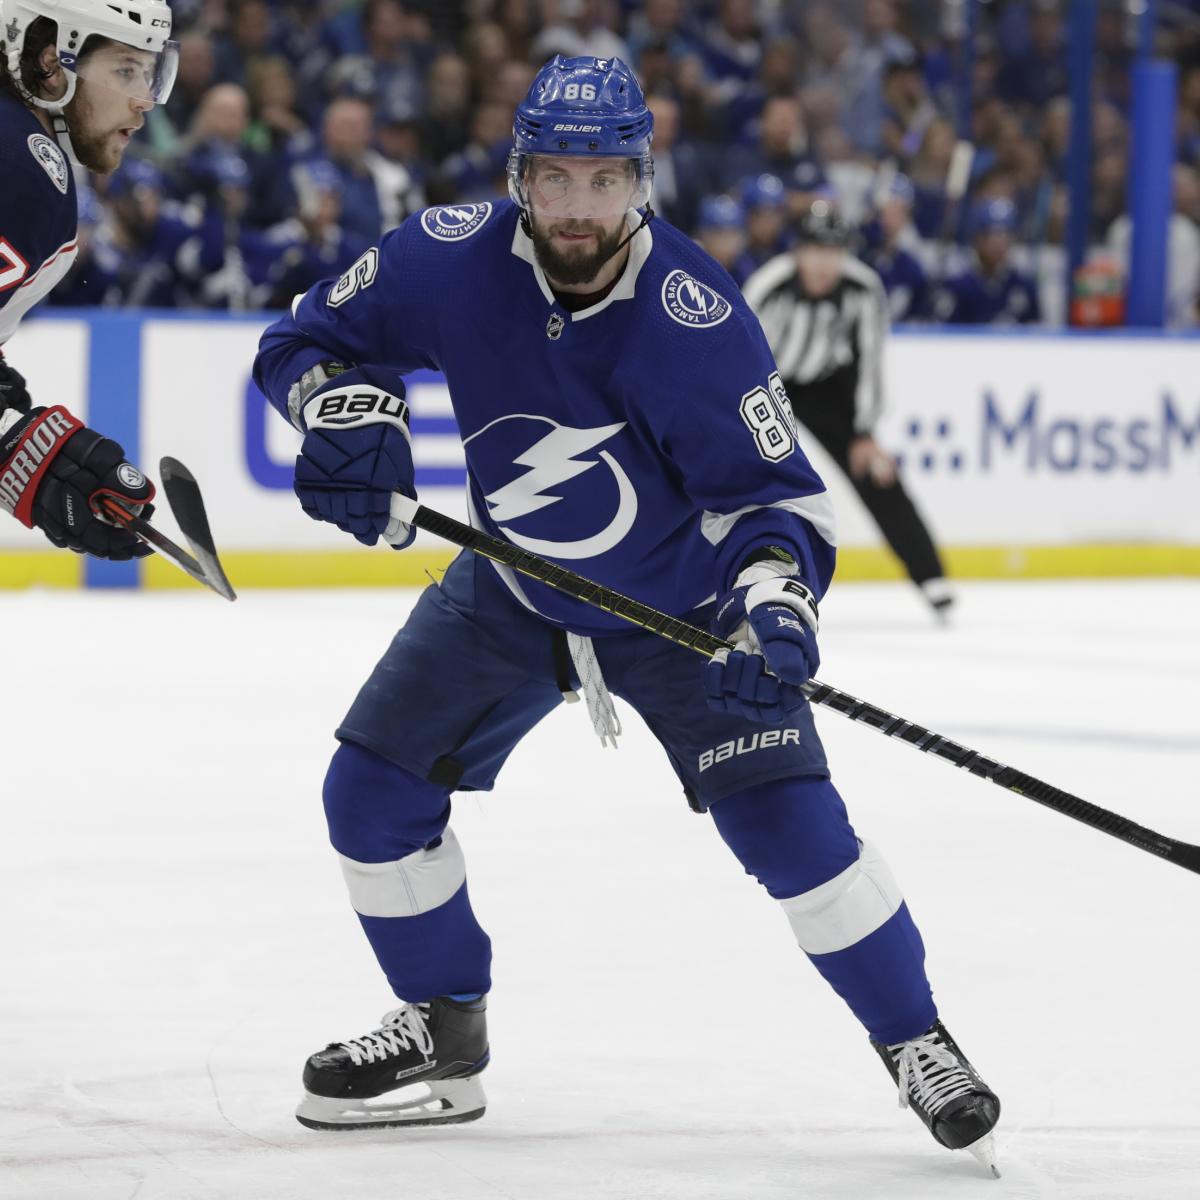 NHL Awards 2019: Ceremony Date, Start Time, Candidates and Predictions | Bleacher Report ...